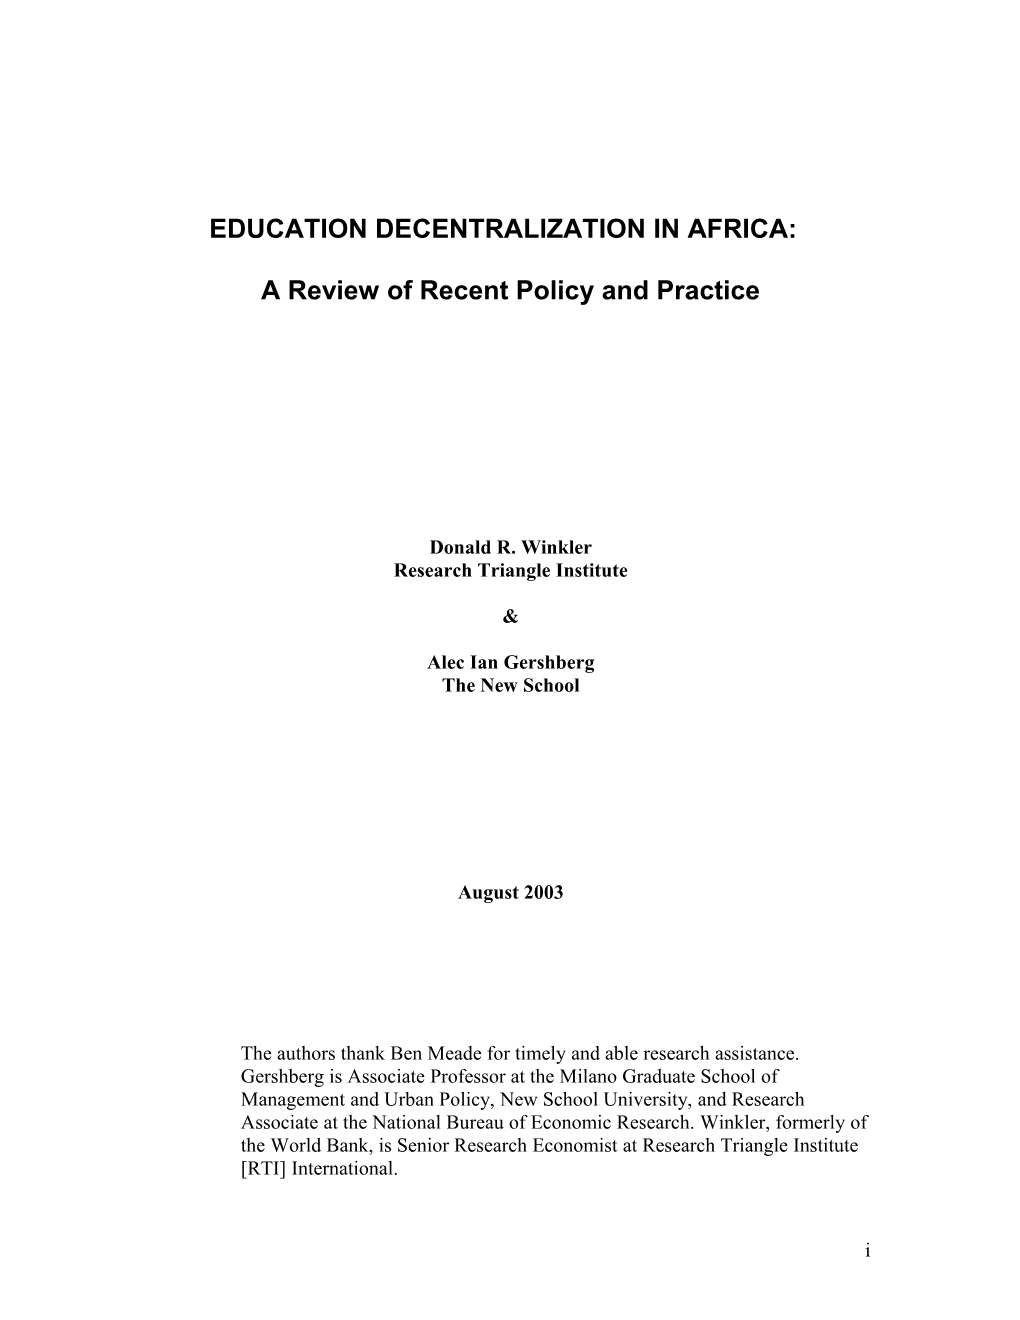 Education Decentralization in Africa: a Typology and Review of Recent Practice